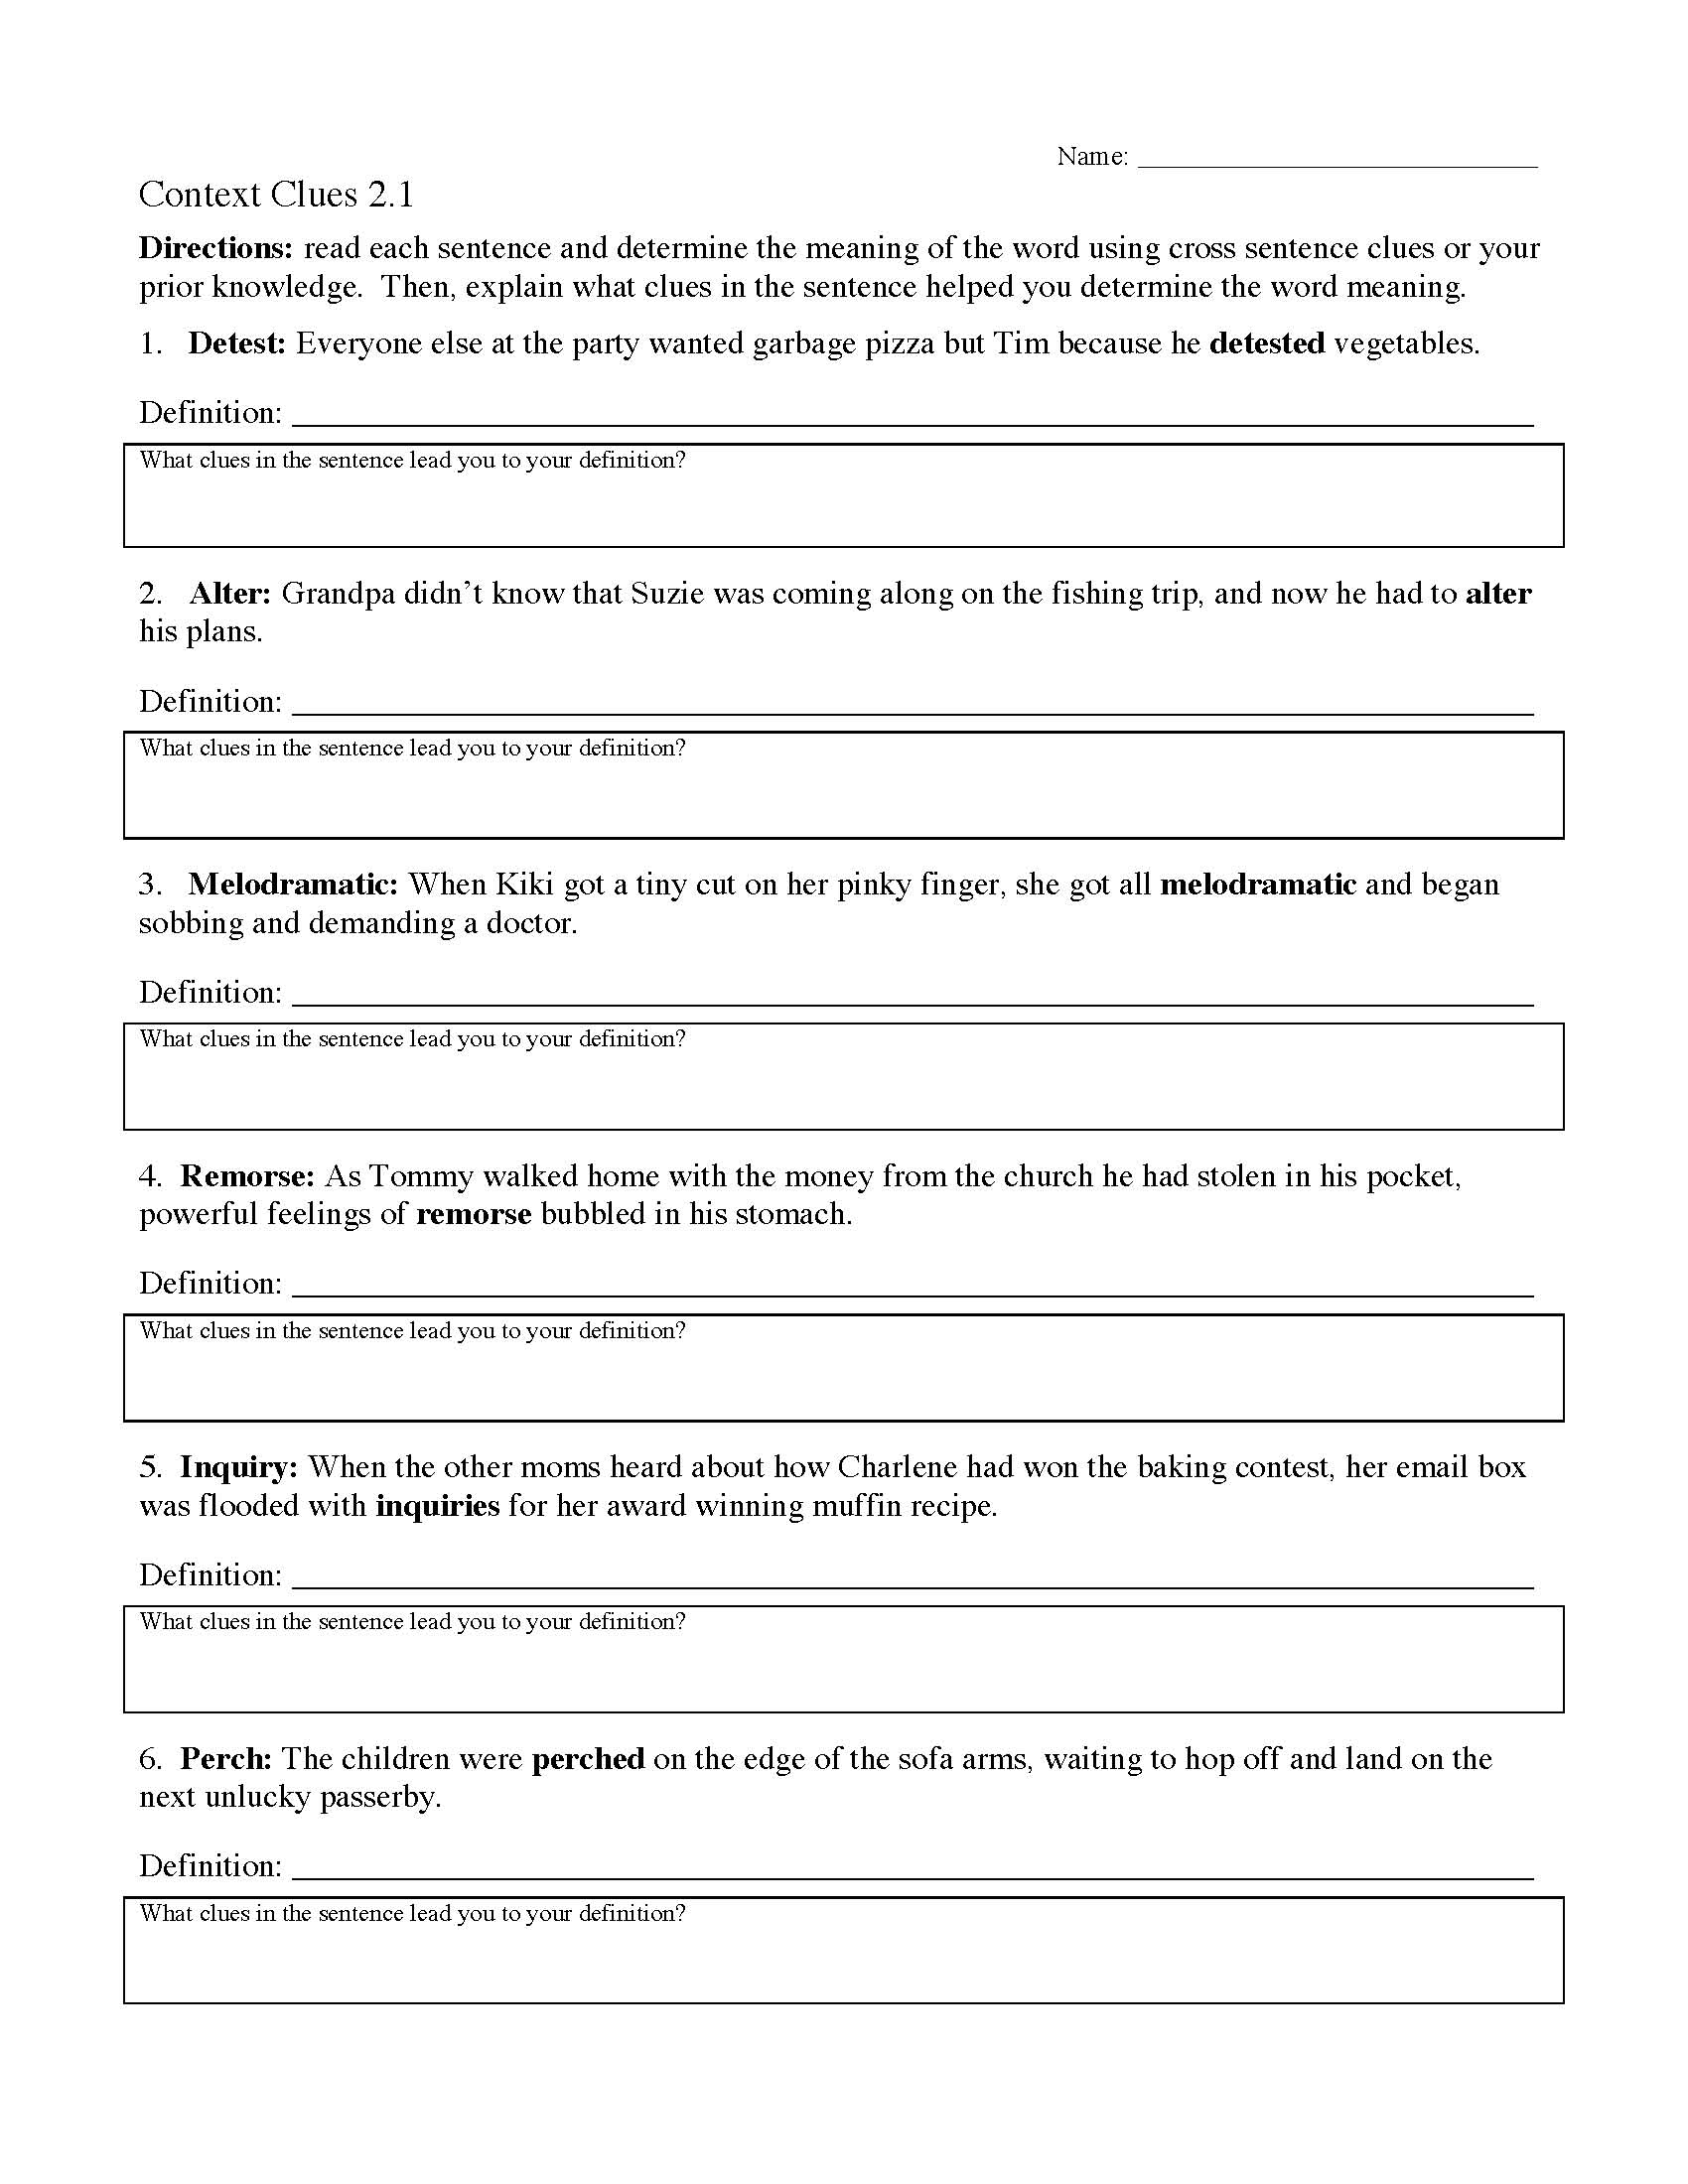 ereading-context-clues-christopher-baum-s-reading-worksheets-hot-sex-picture